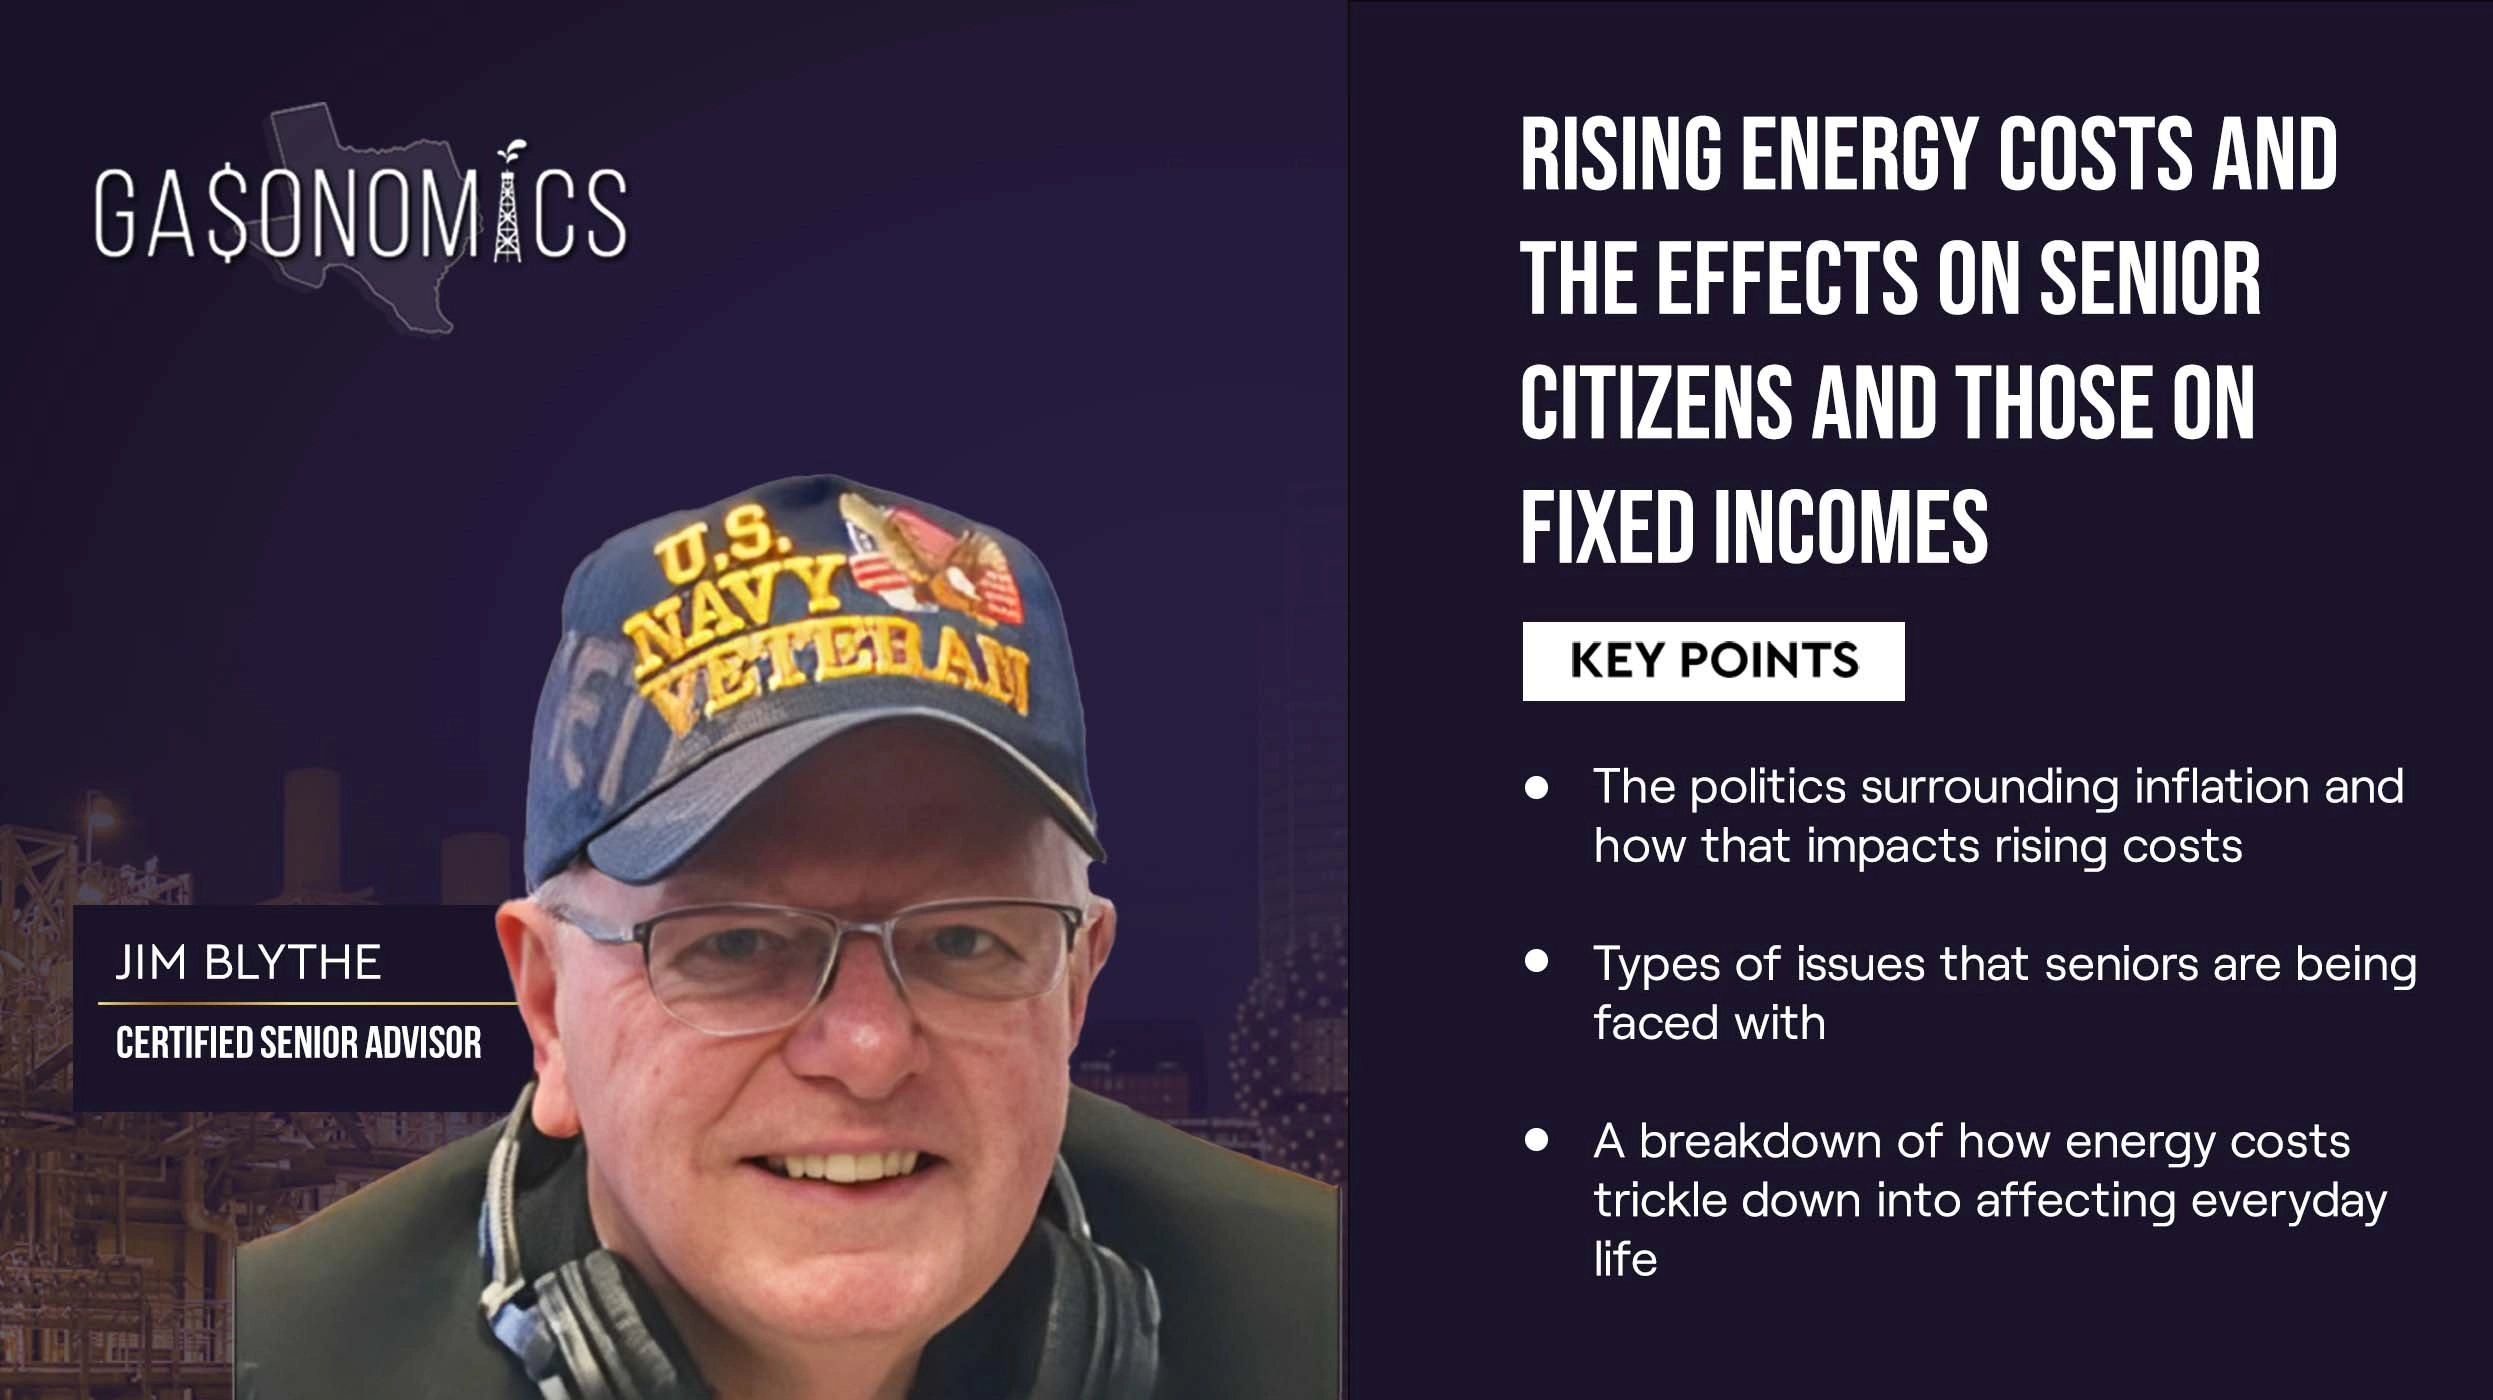 Rising Energy Costs and the Effects on Senior Citizens and Those on Fixed Incomes